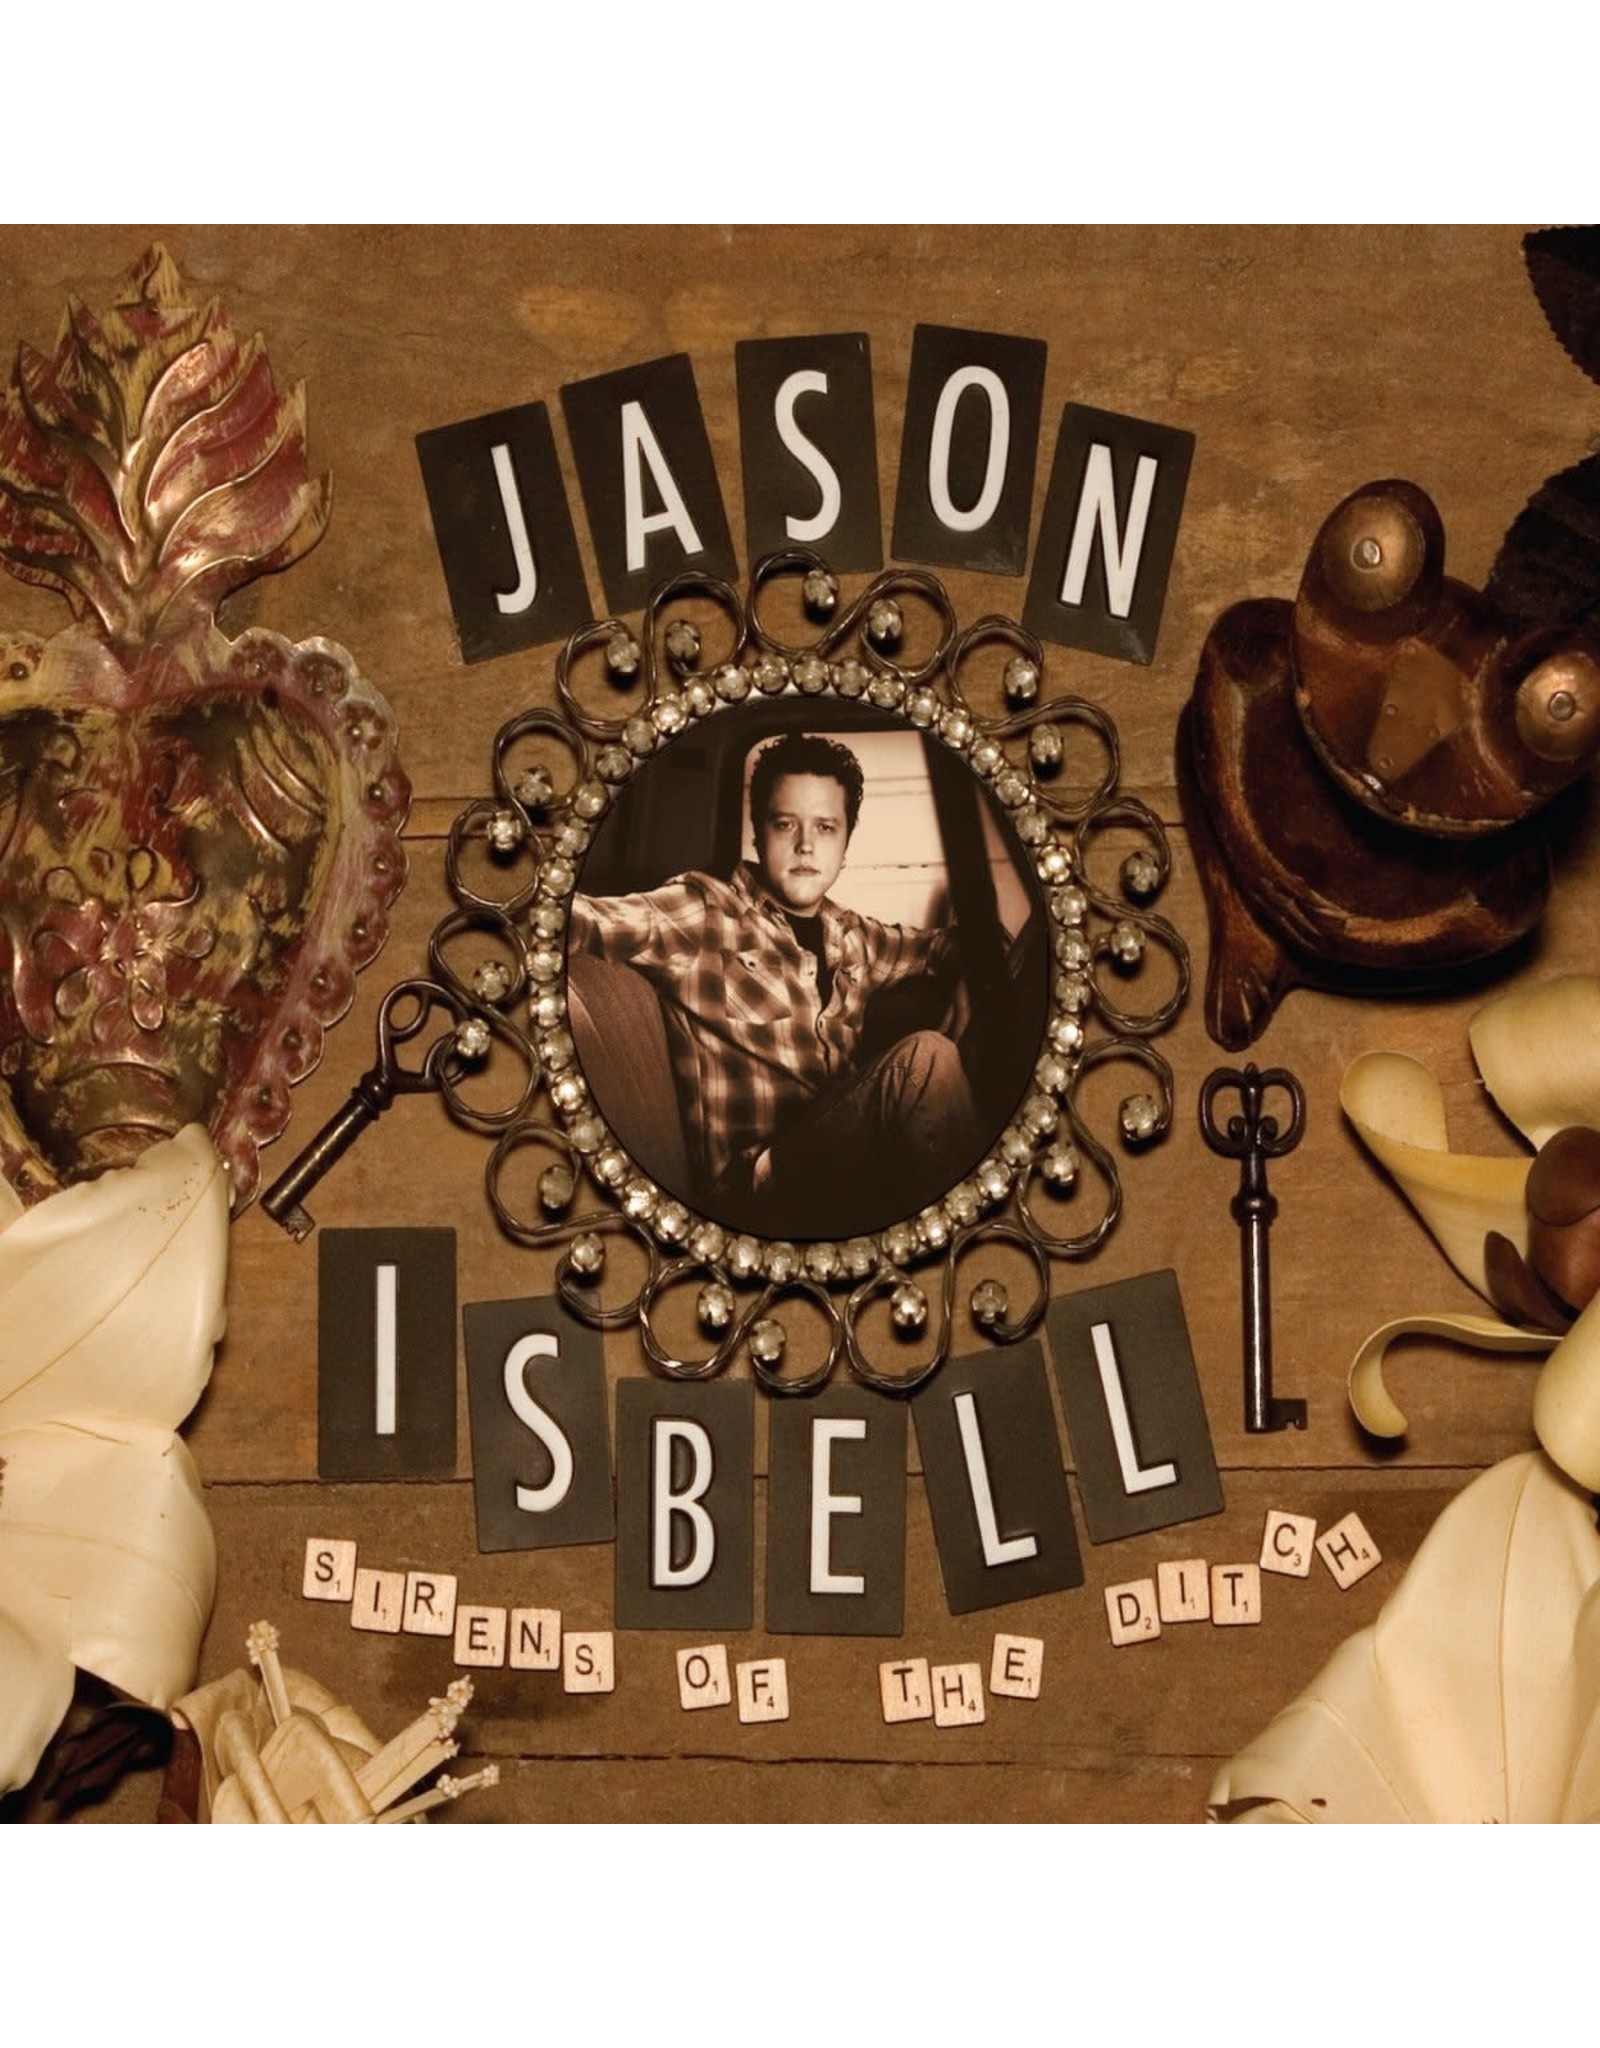 Jason Isbell - Sirens of the Ditch (Deluxe Edition)